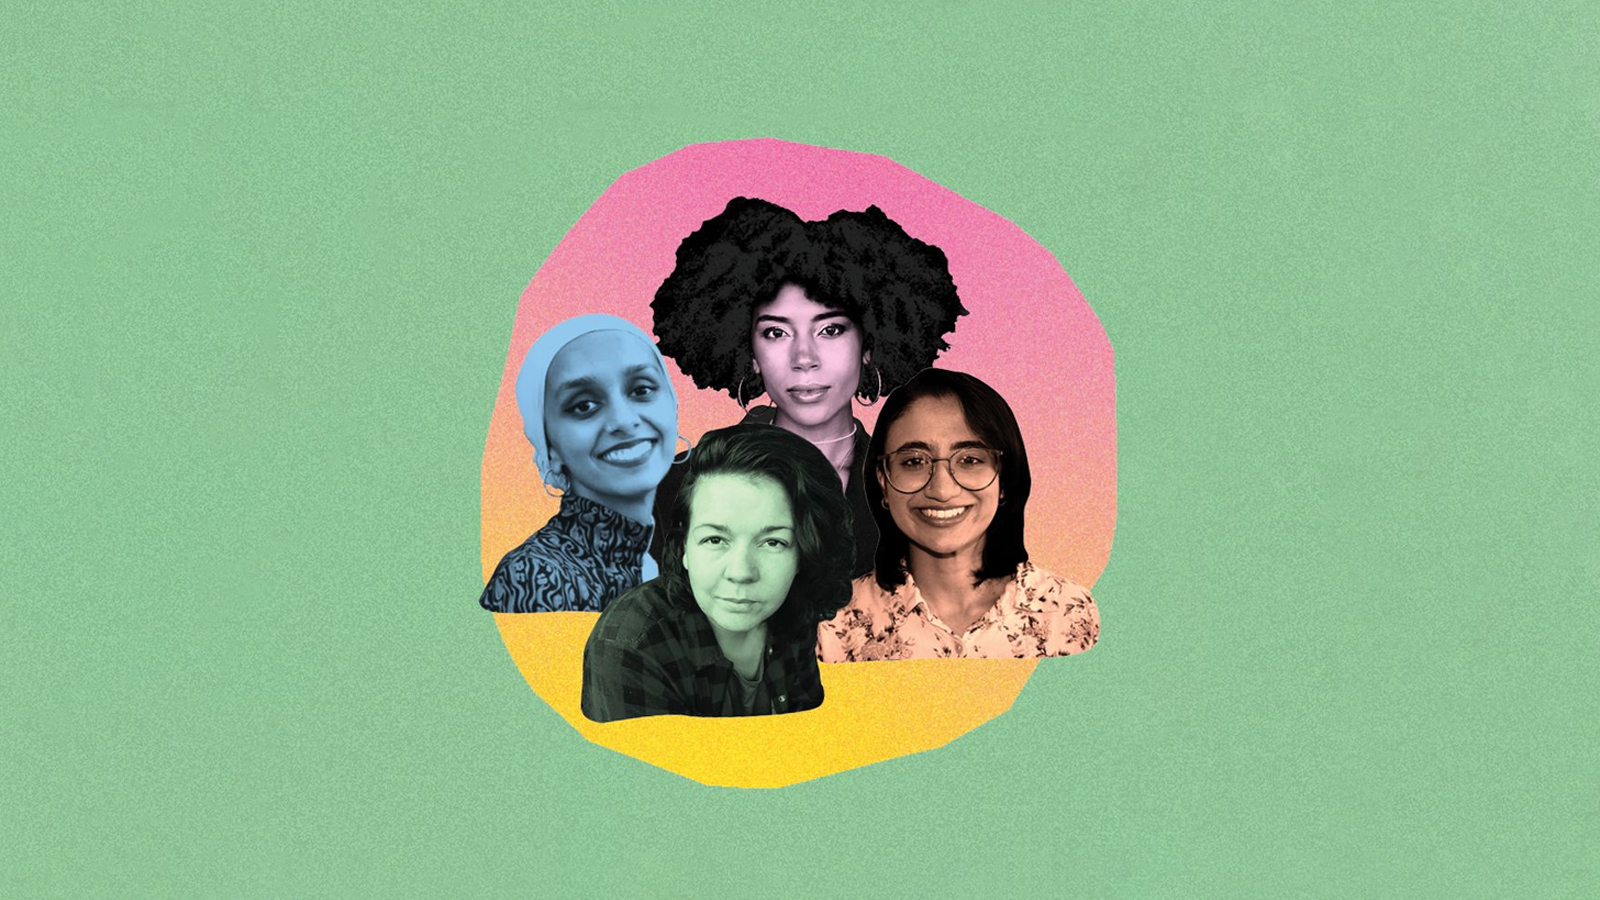 Four women's headshots cut out into a pink and yellow circle on a green background.